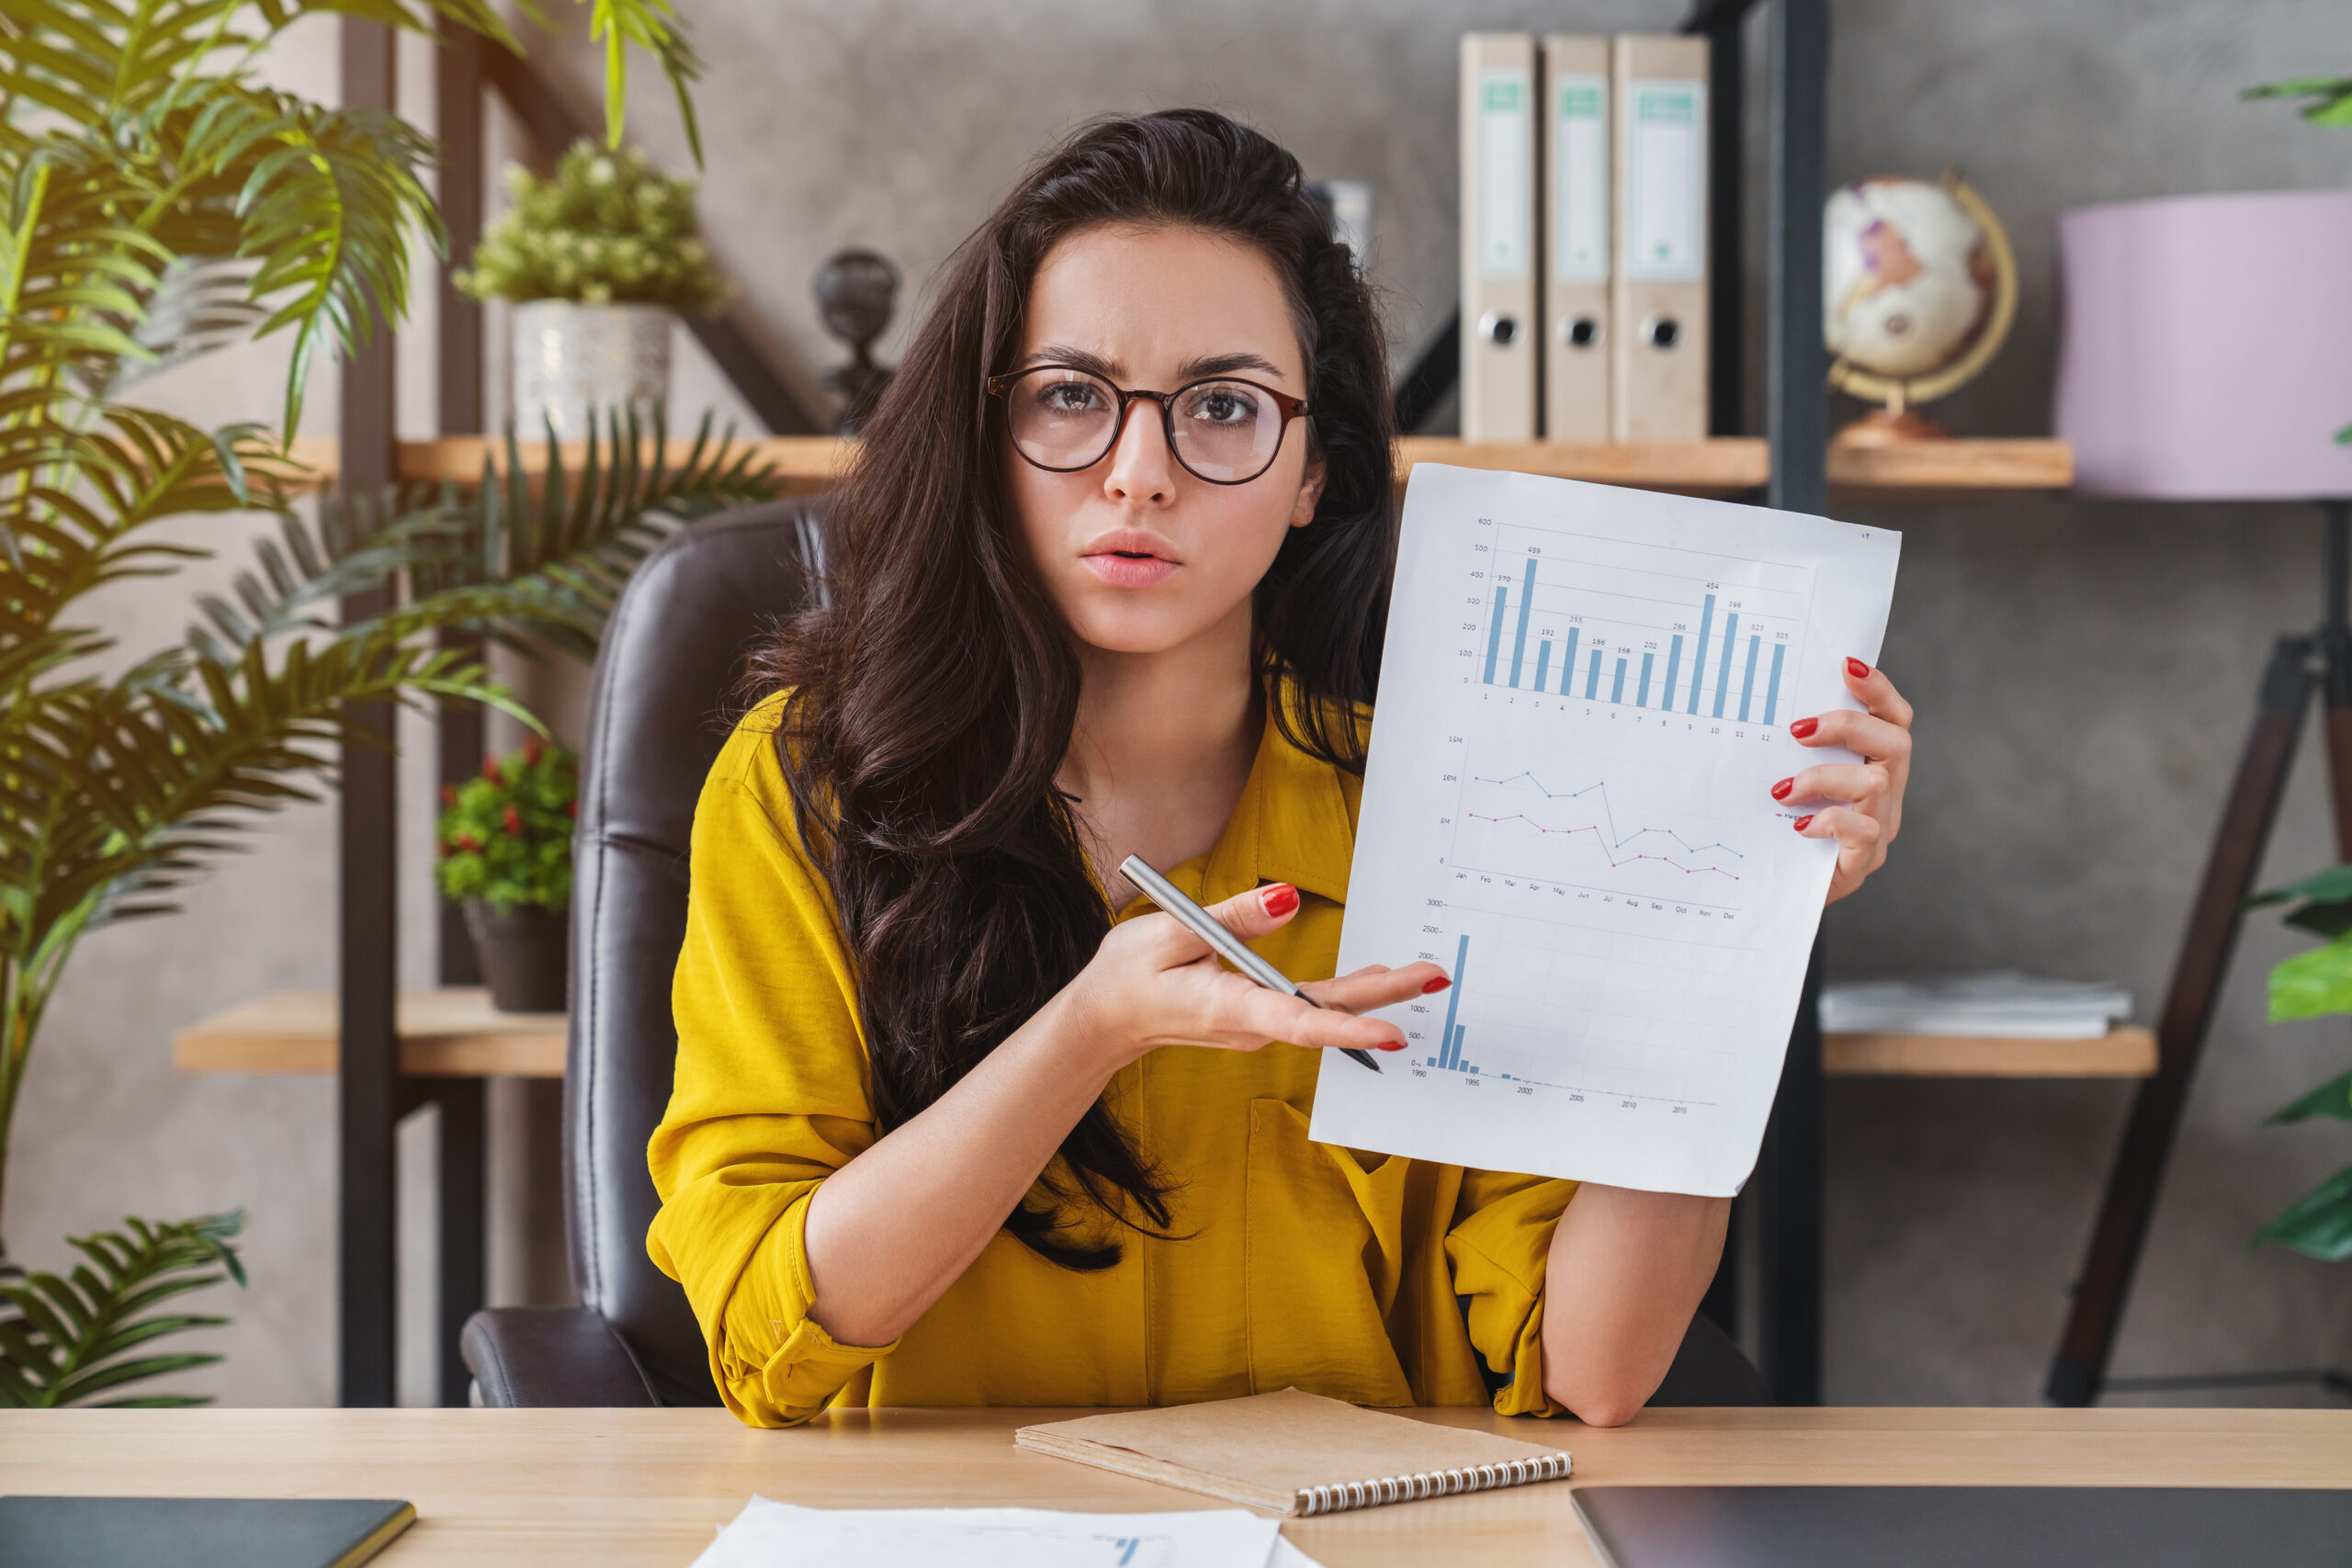 Photo of a Latina woman with long dark hair and glasses, sitting behind a desk and holding up a paper with graphs and charts on it.